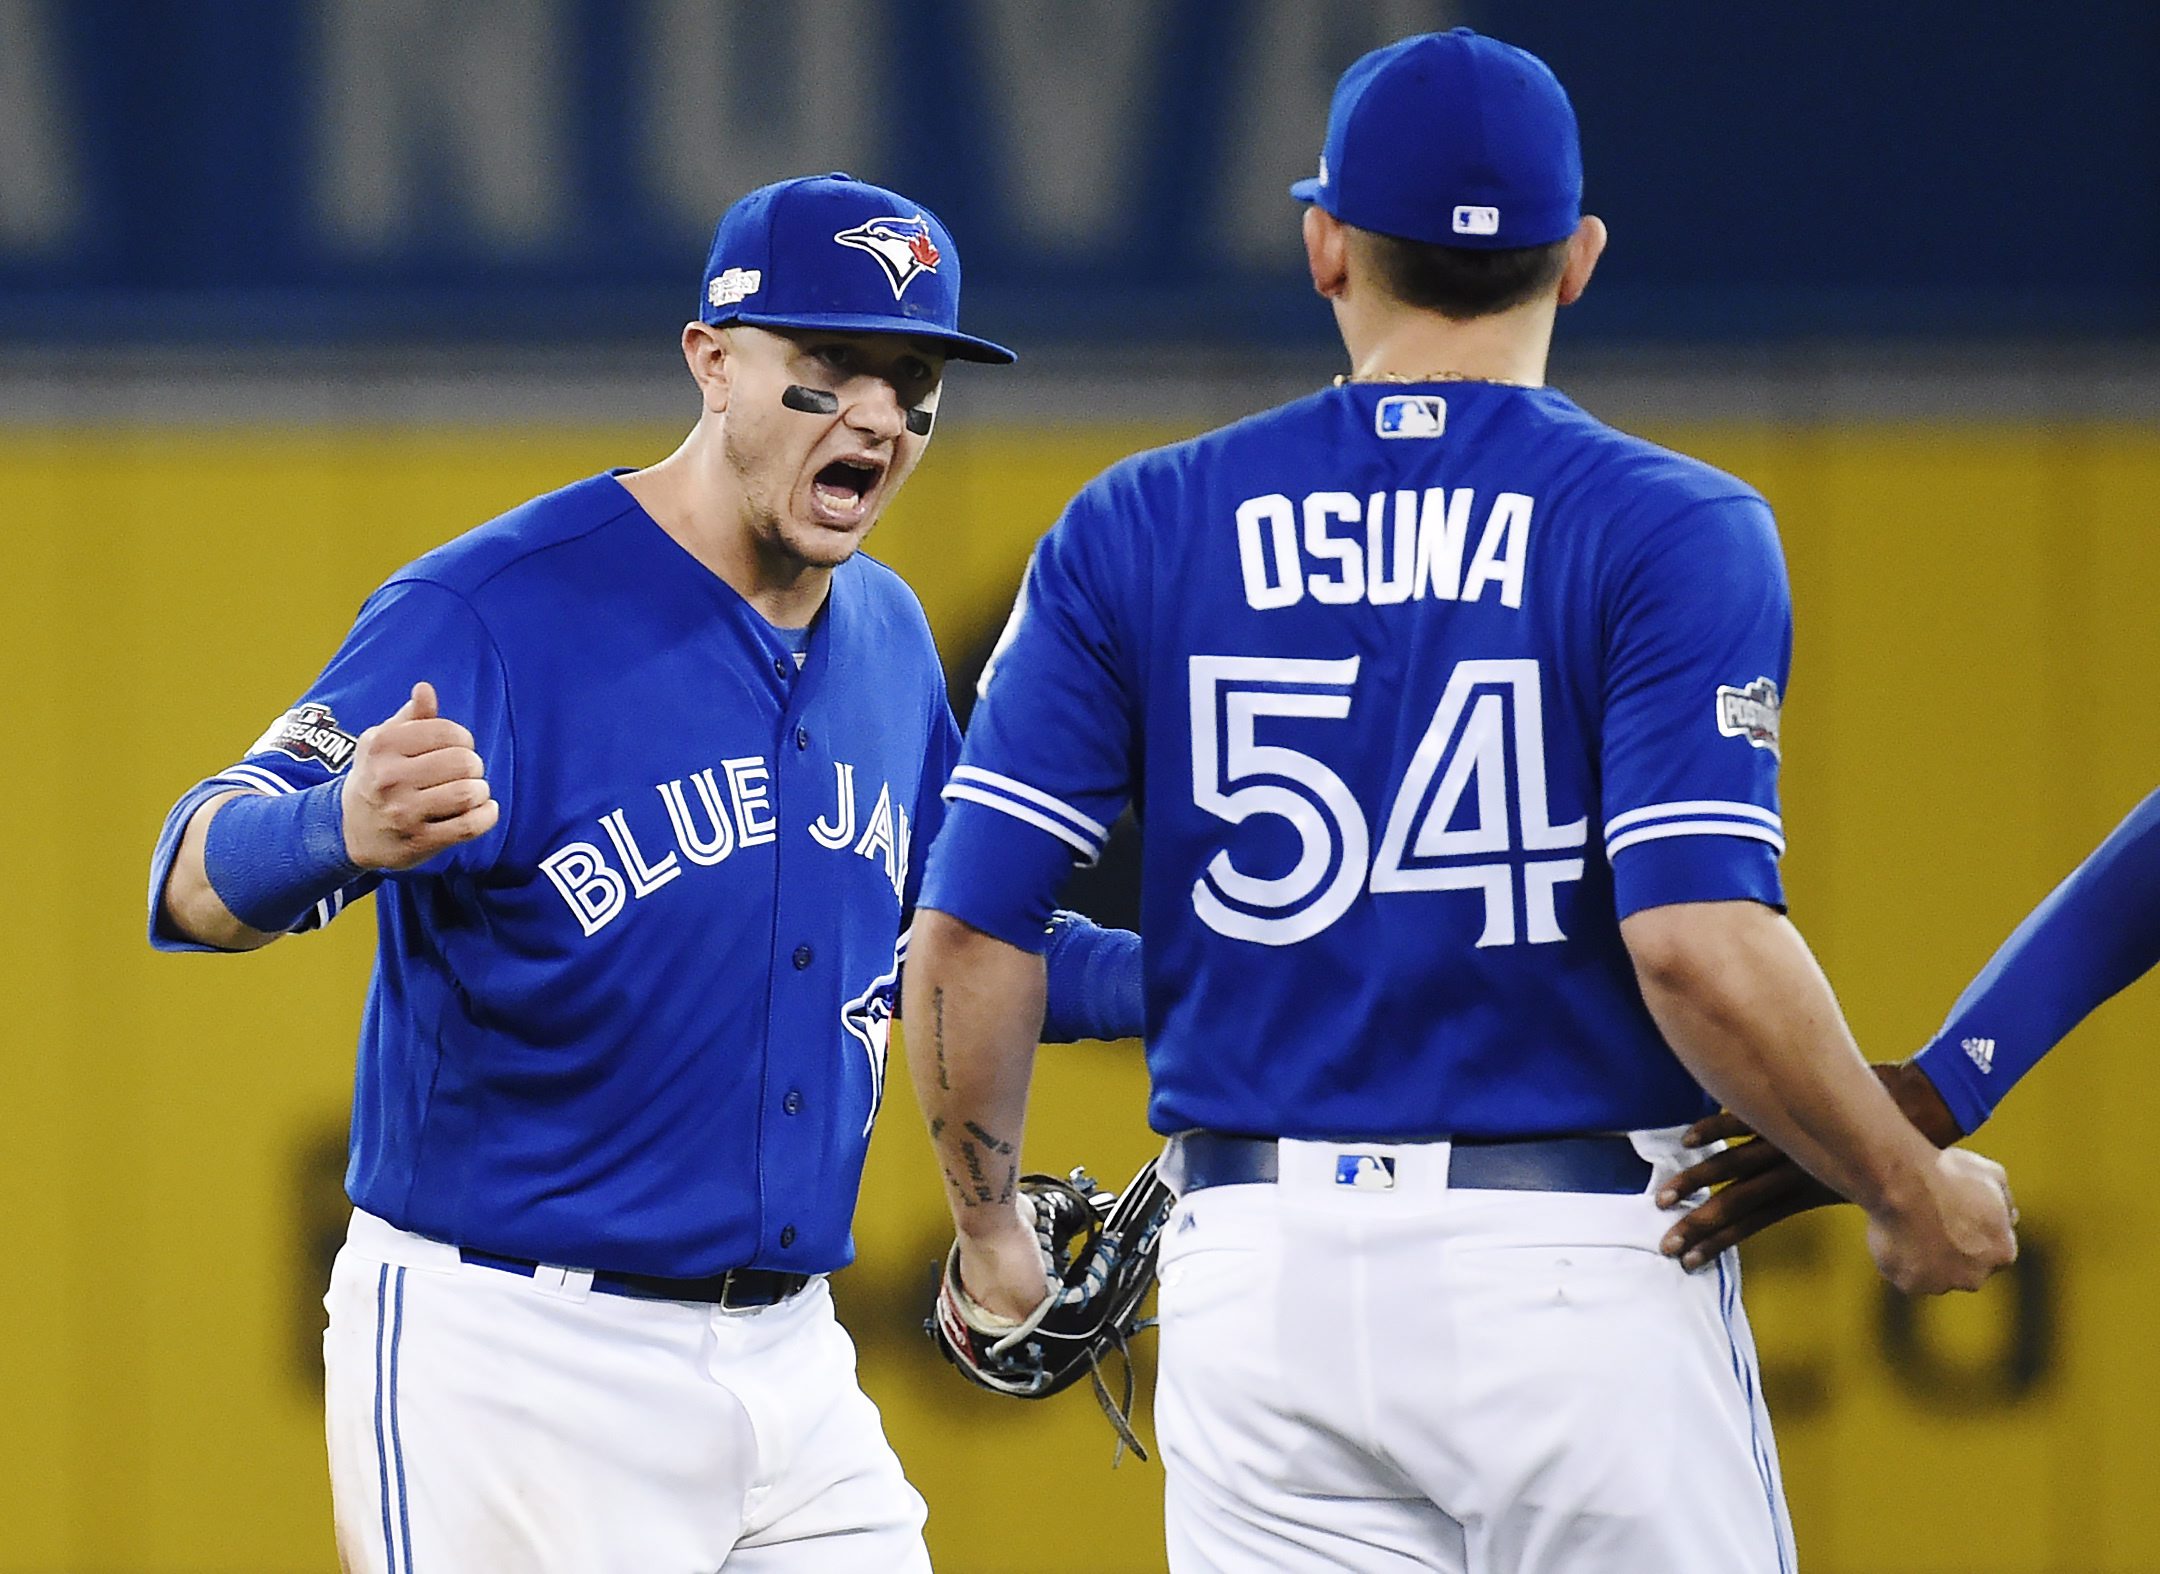 Toronto Blue Jays shortstop Troy Tulowitzki (2) and relief pitcher Roberto Osuna (54) celebrate the team's 5-1 victory over the Cleveland Indians in Game 4 of the baseball American League Championship Series, Tuesday, Oct. 18, 2016, in Toronto. (Nathan Denette/The Canadian Press via AP)